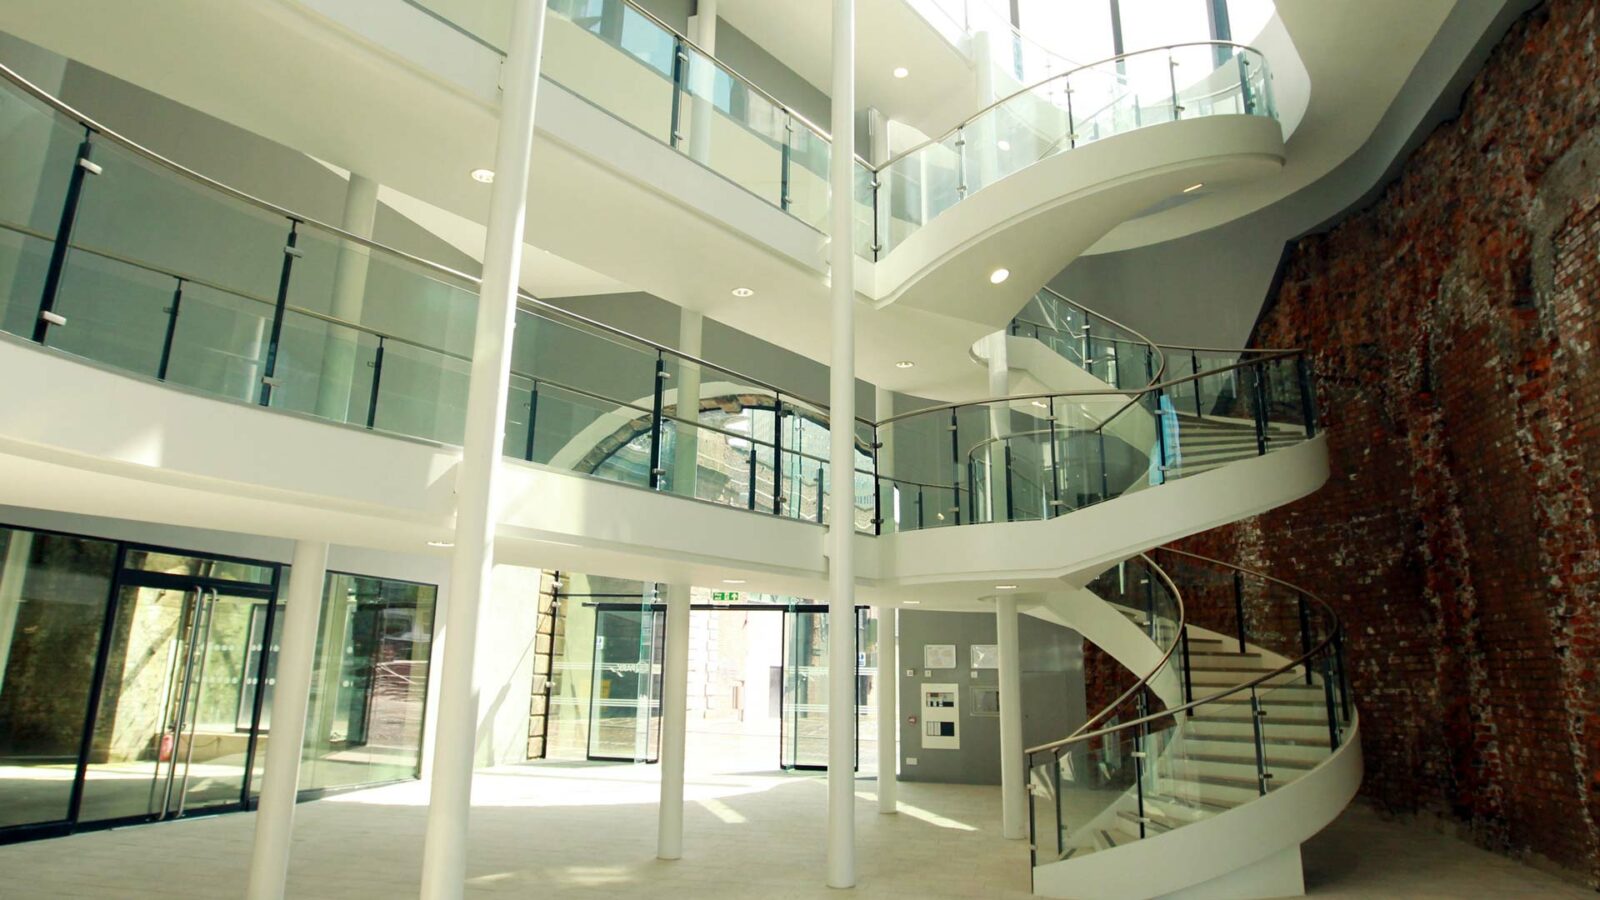 Spiral staircase connecting the offices to the car park